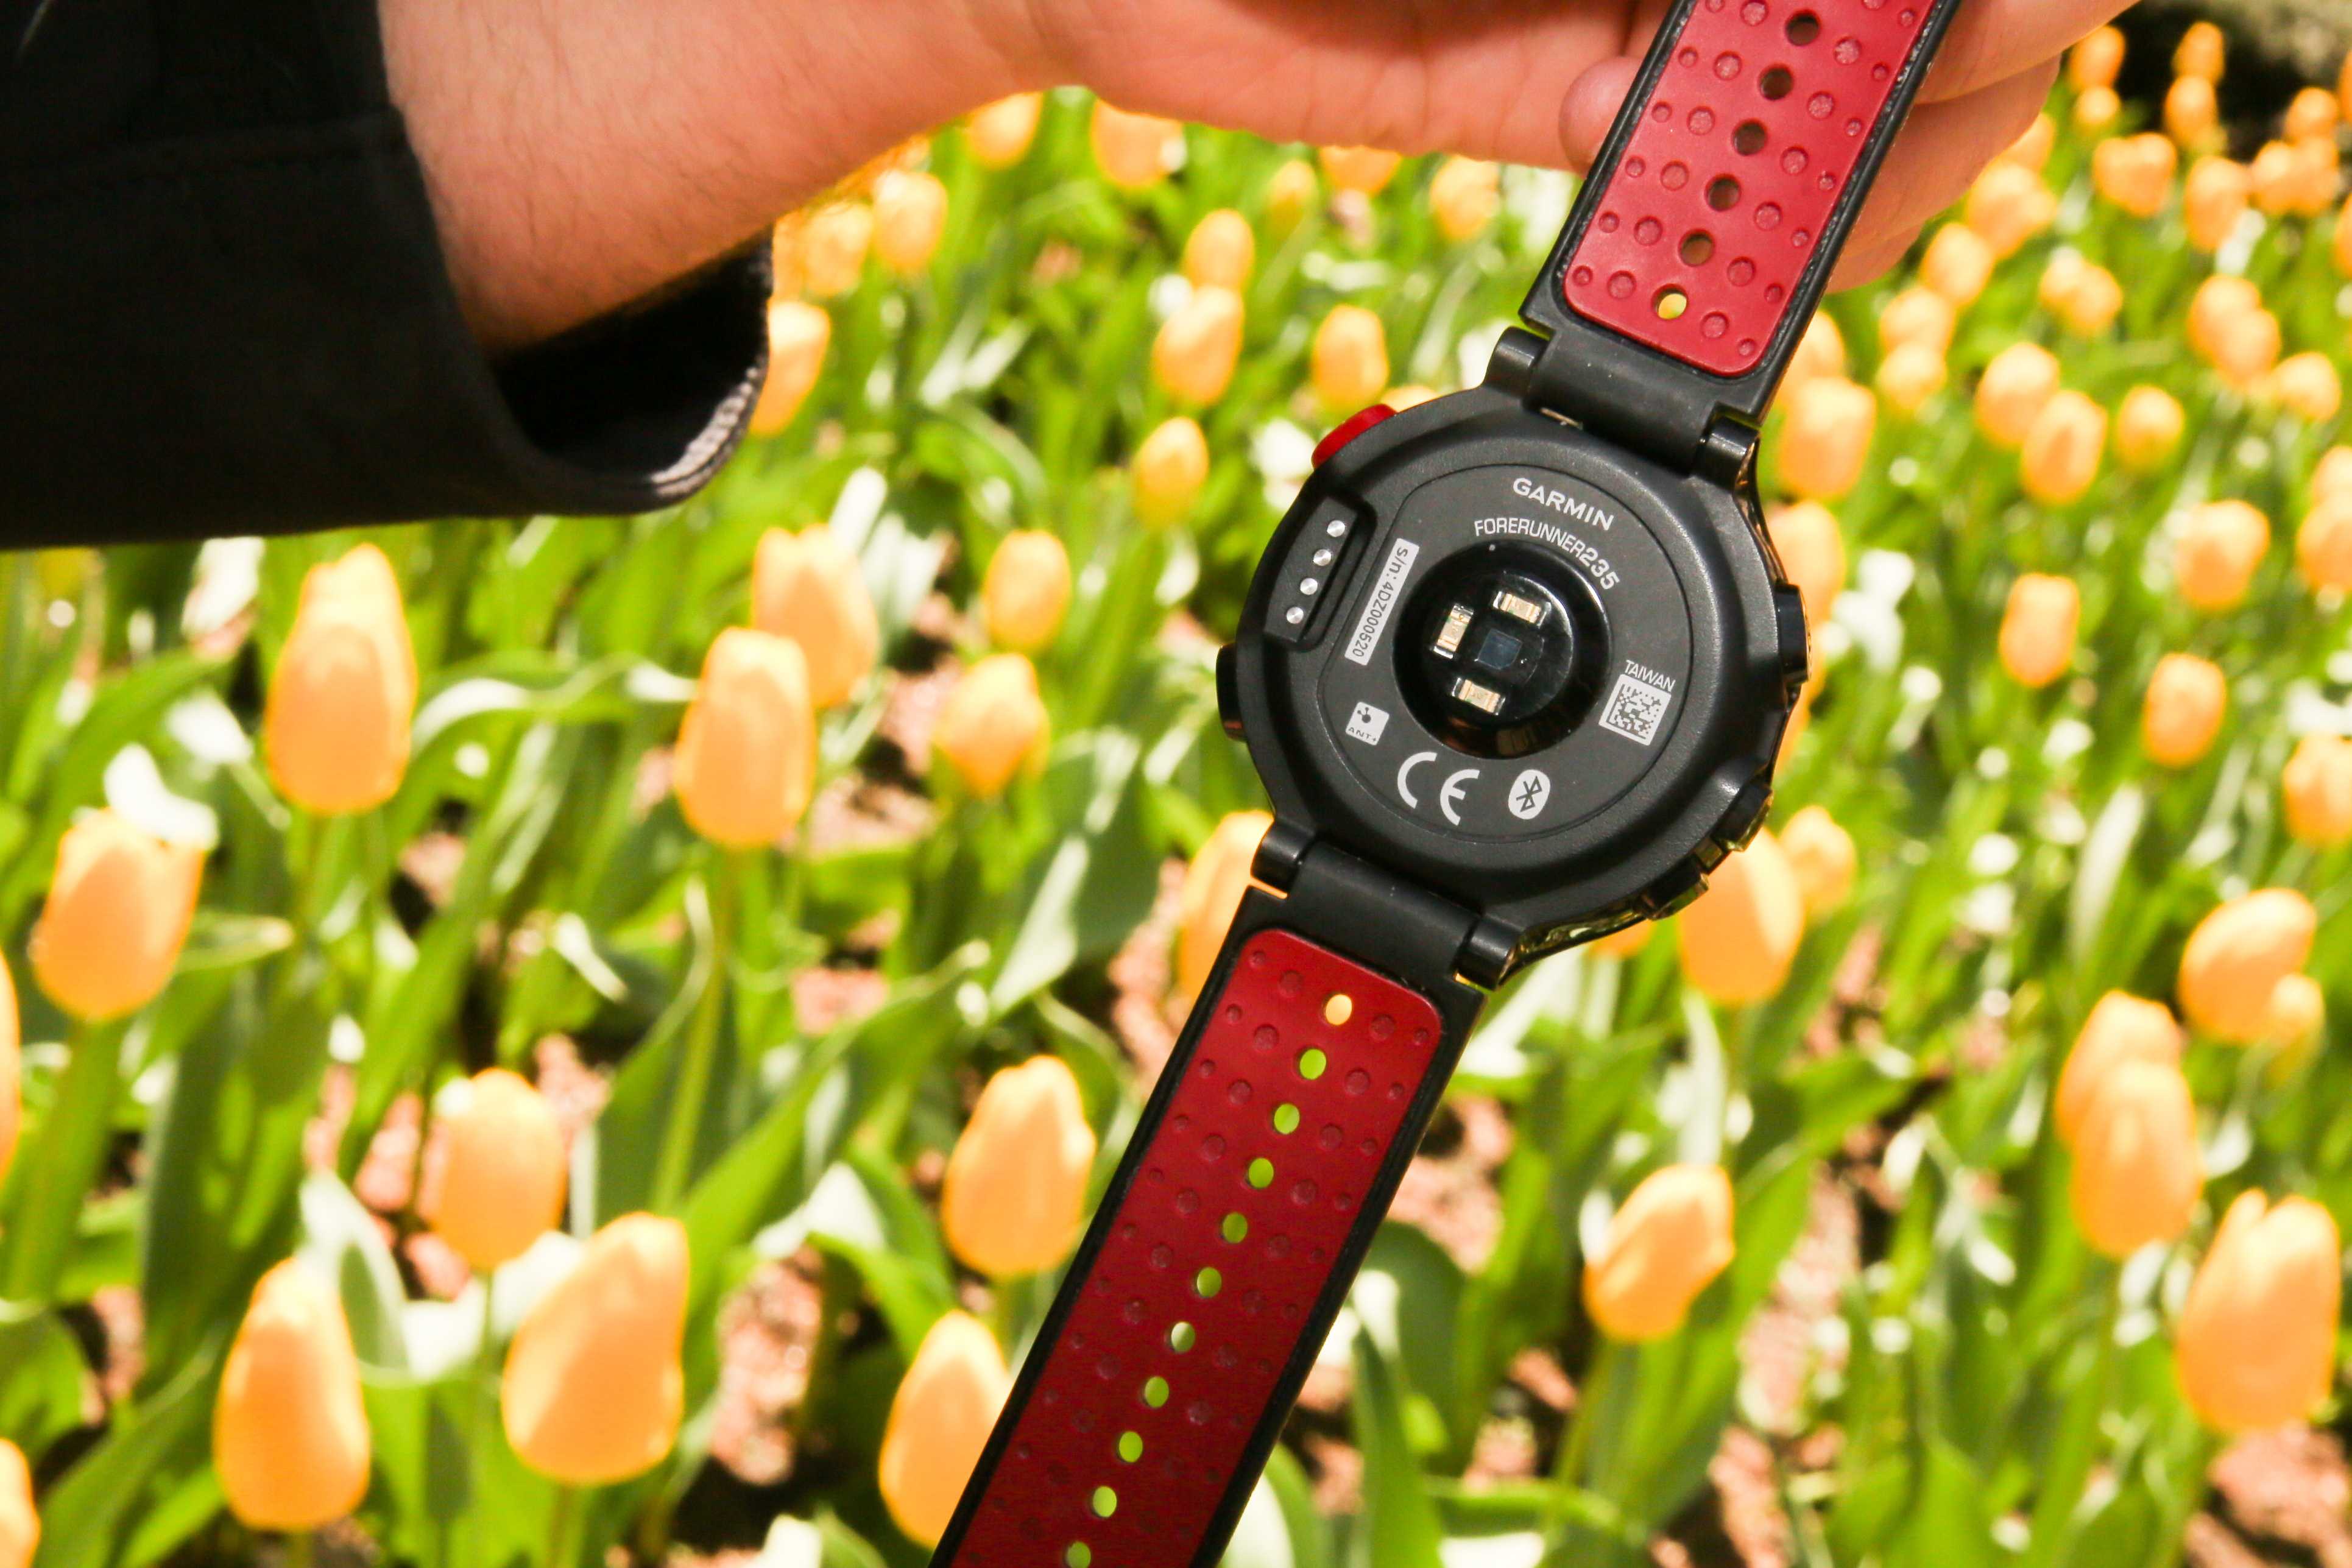 Garmin Forerunner 235 review: The best watch for casual and 